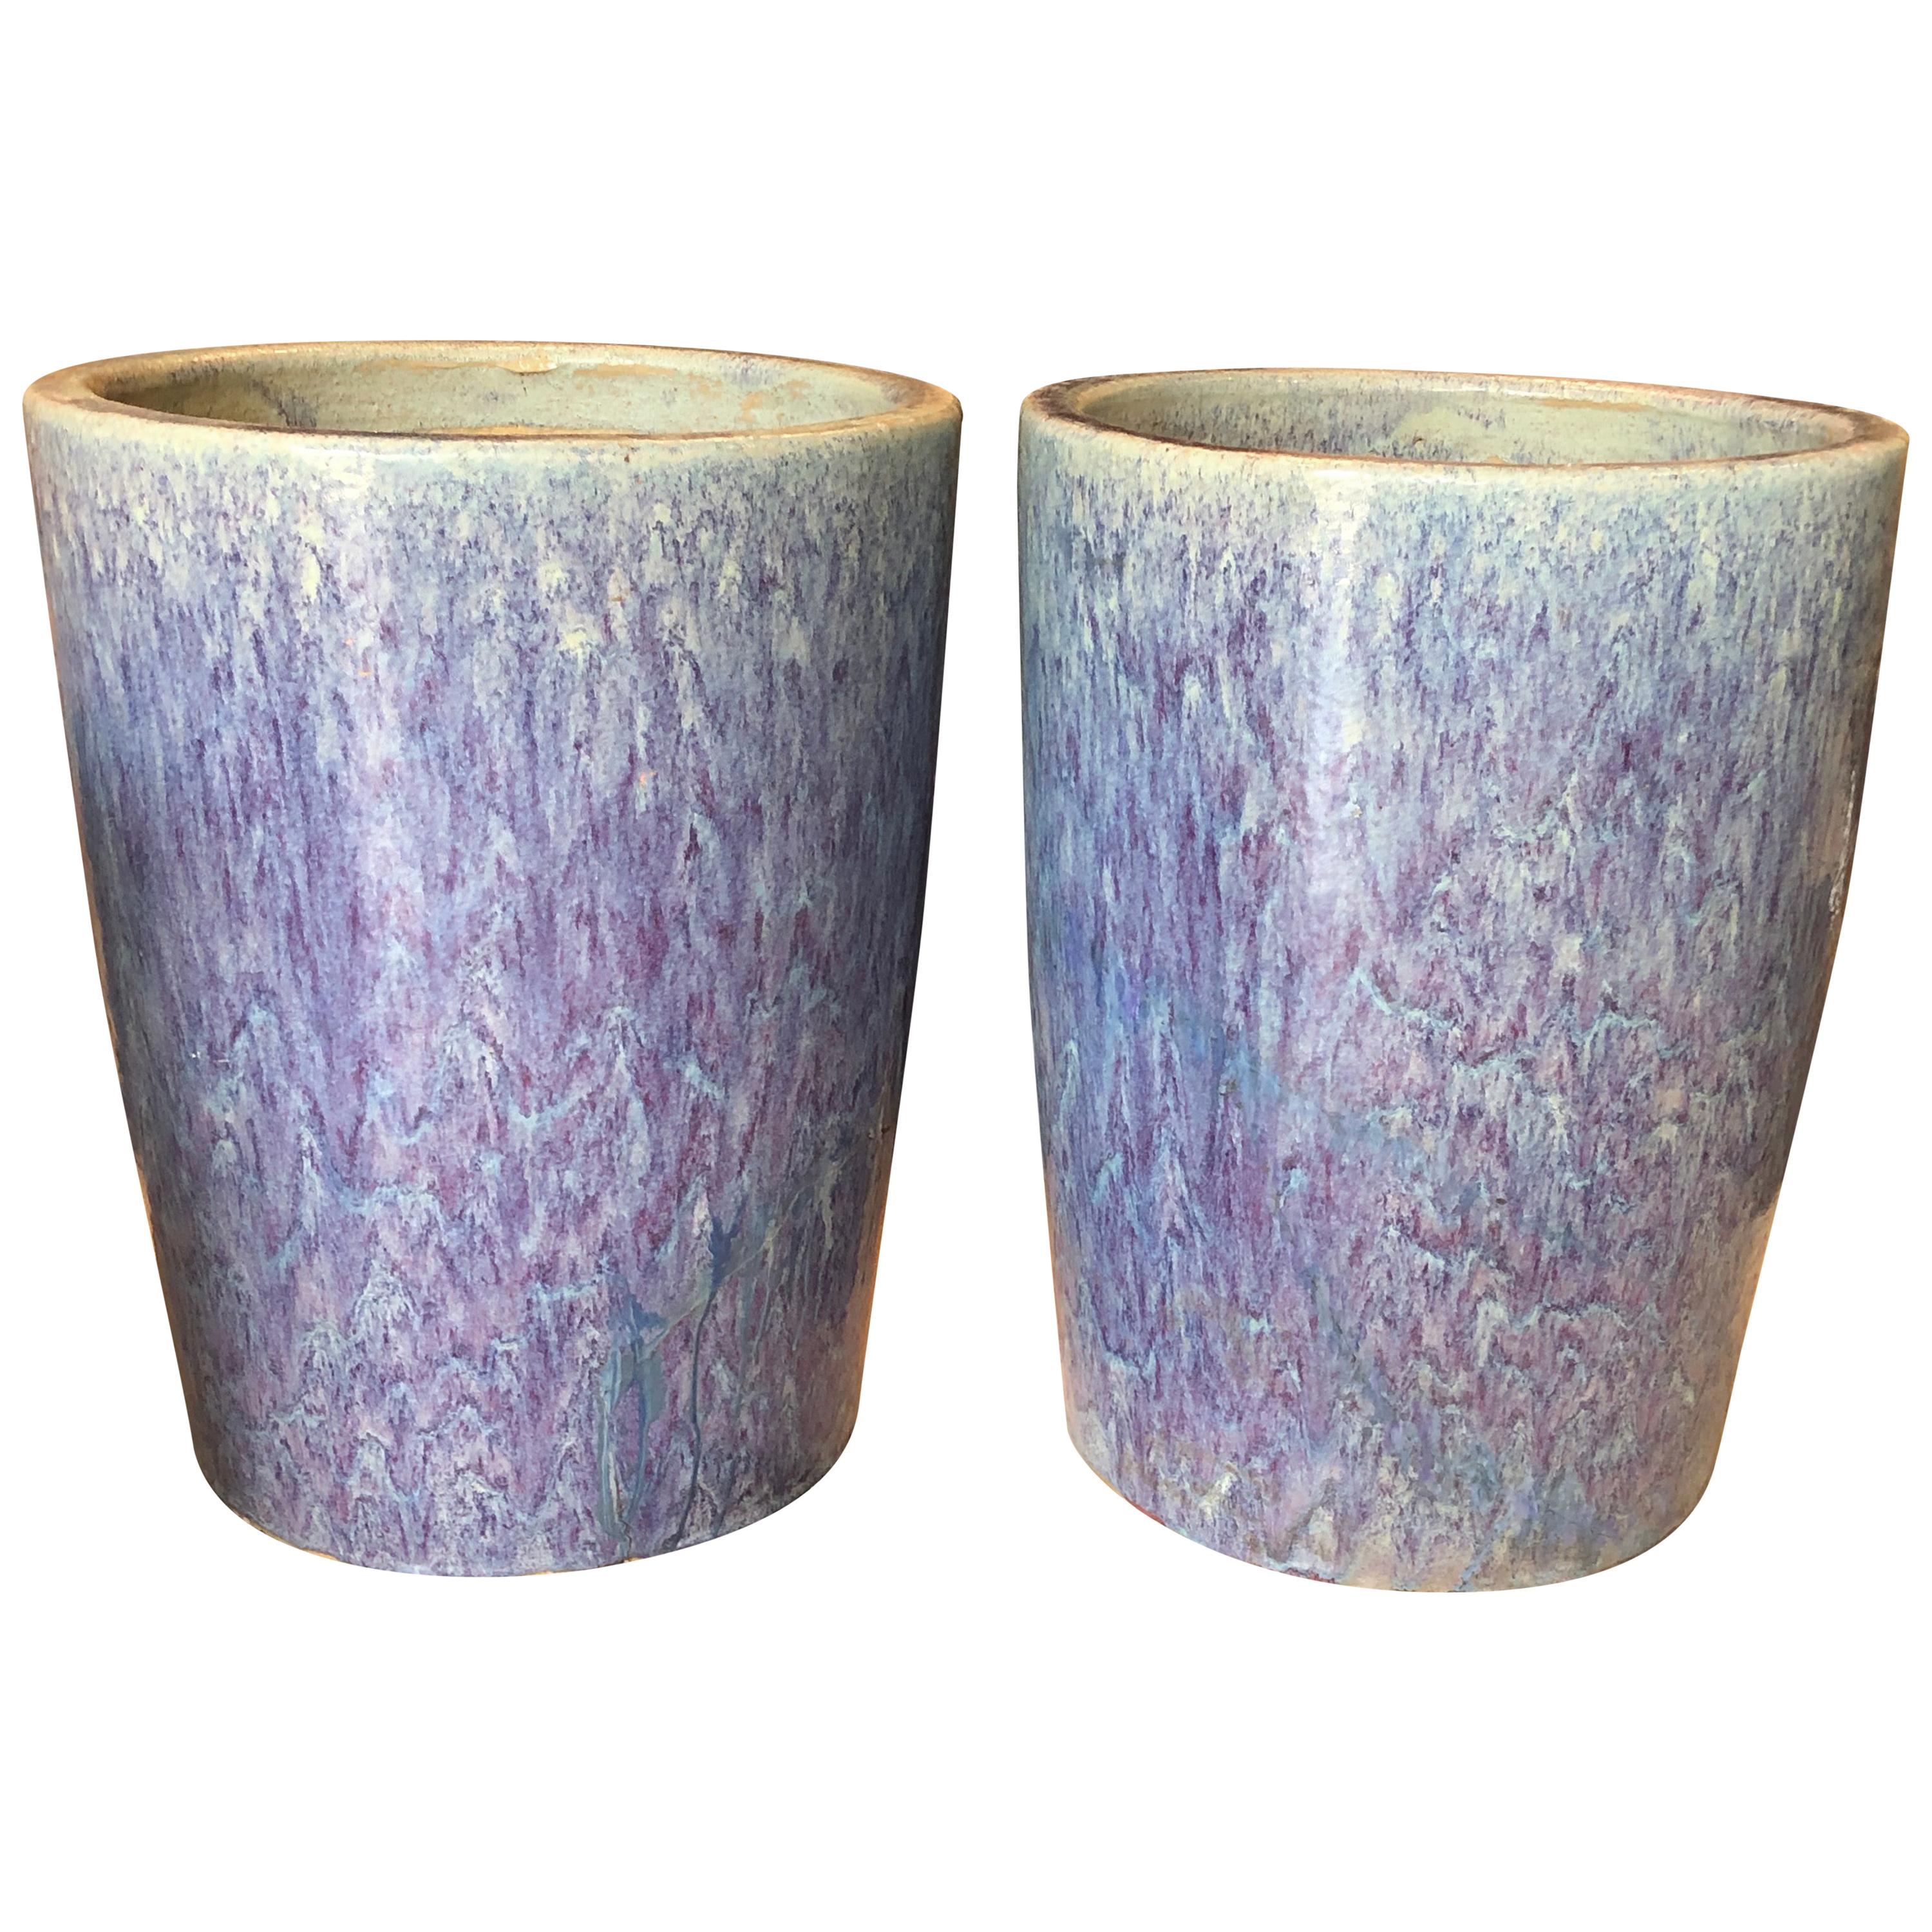 Pair of Chinese Multi-Glazed in Blue Tall Planters 